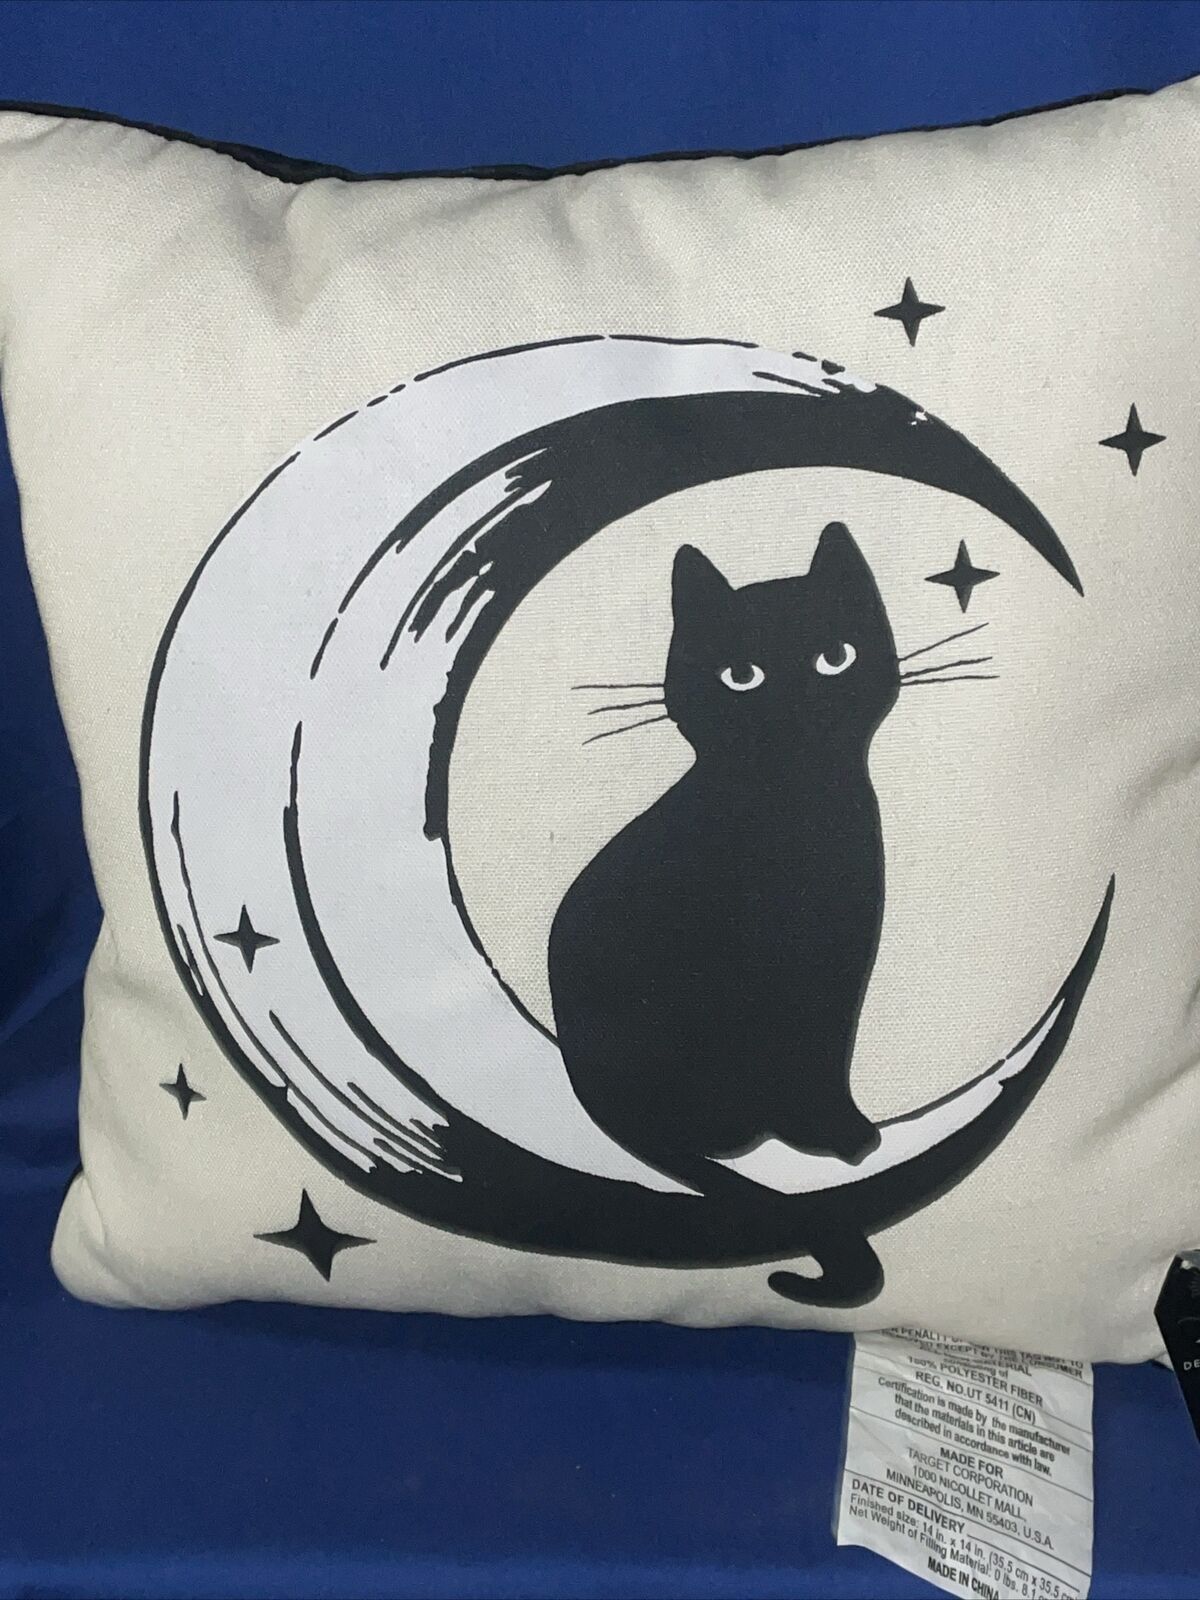 Crescent Moon Black Cat Sitting On the Gothic Art Throw Pillow NEW NWT ❤️gsc17m1 TARGET